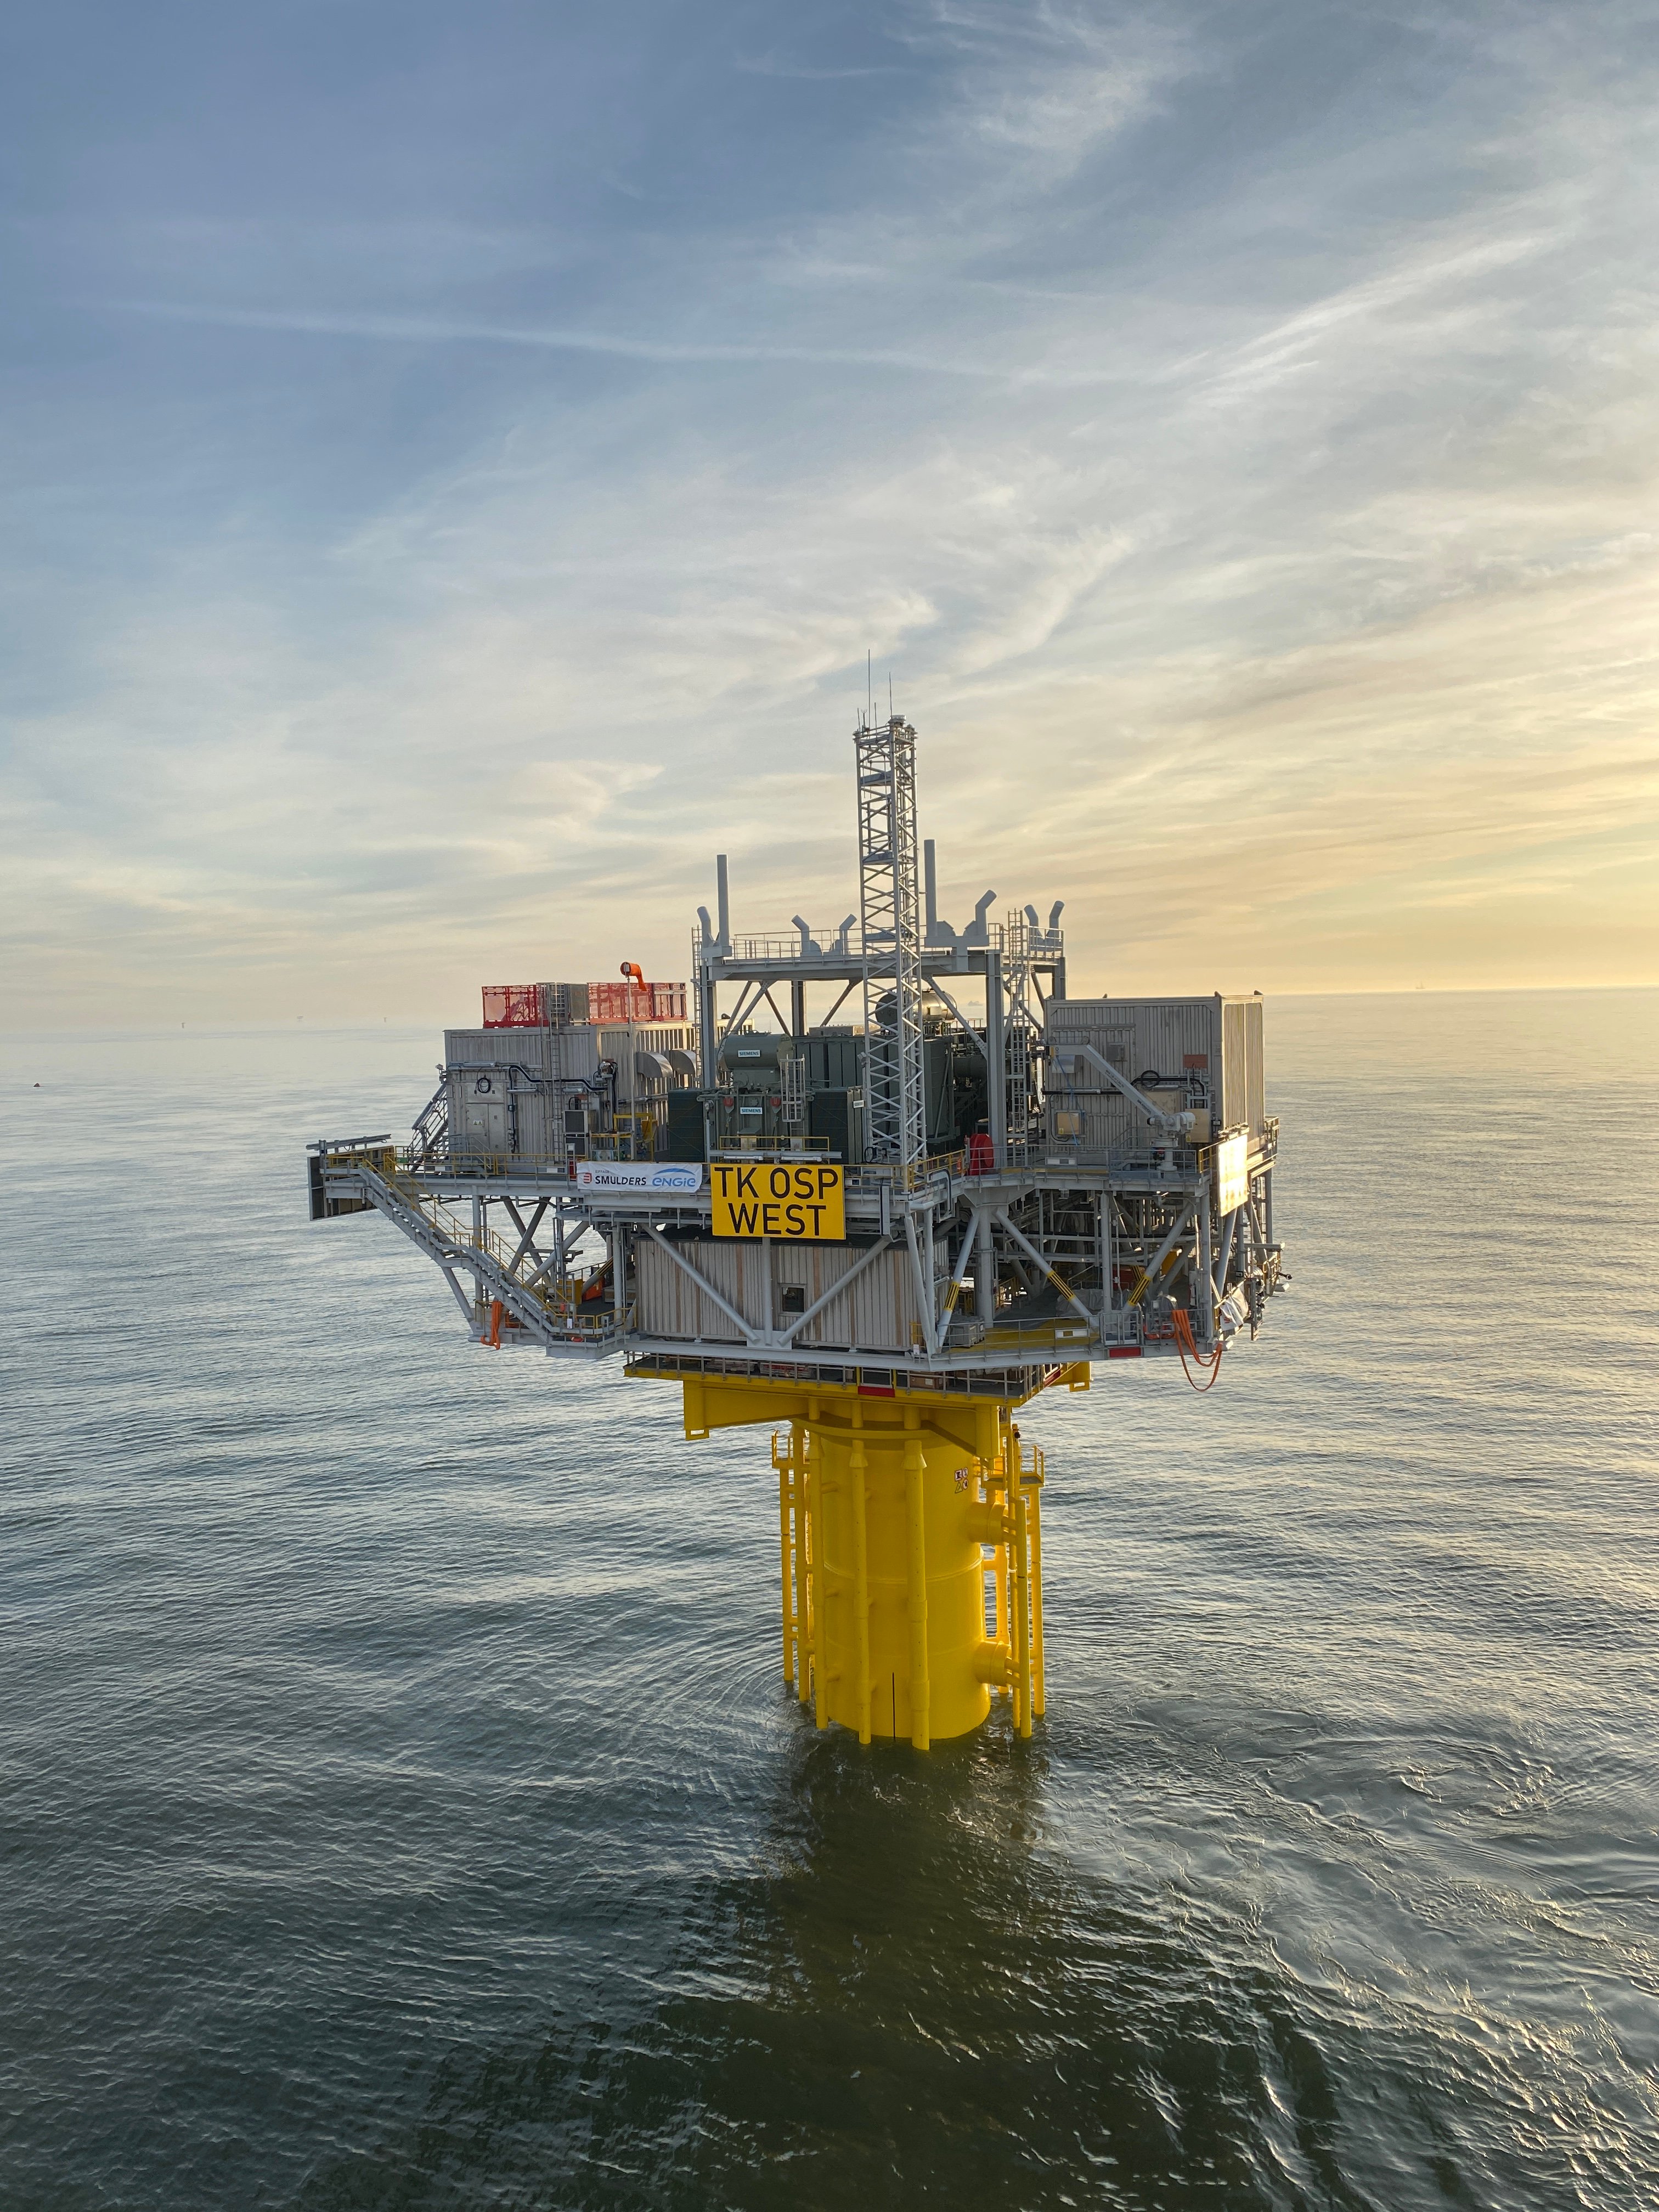 Triton Knoll East Topside Heads Offshore | Offshore Wind